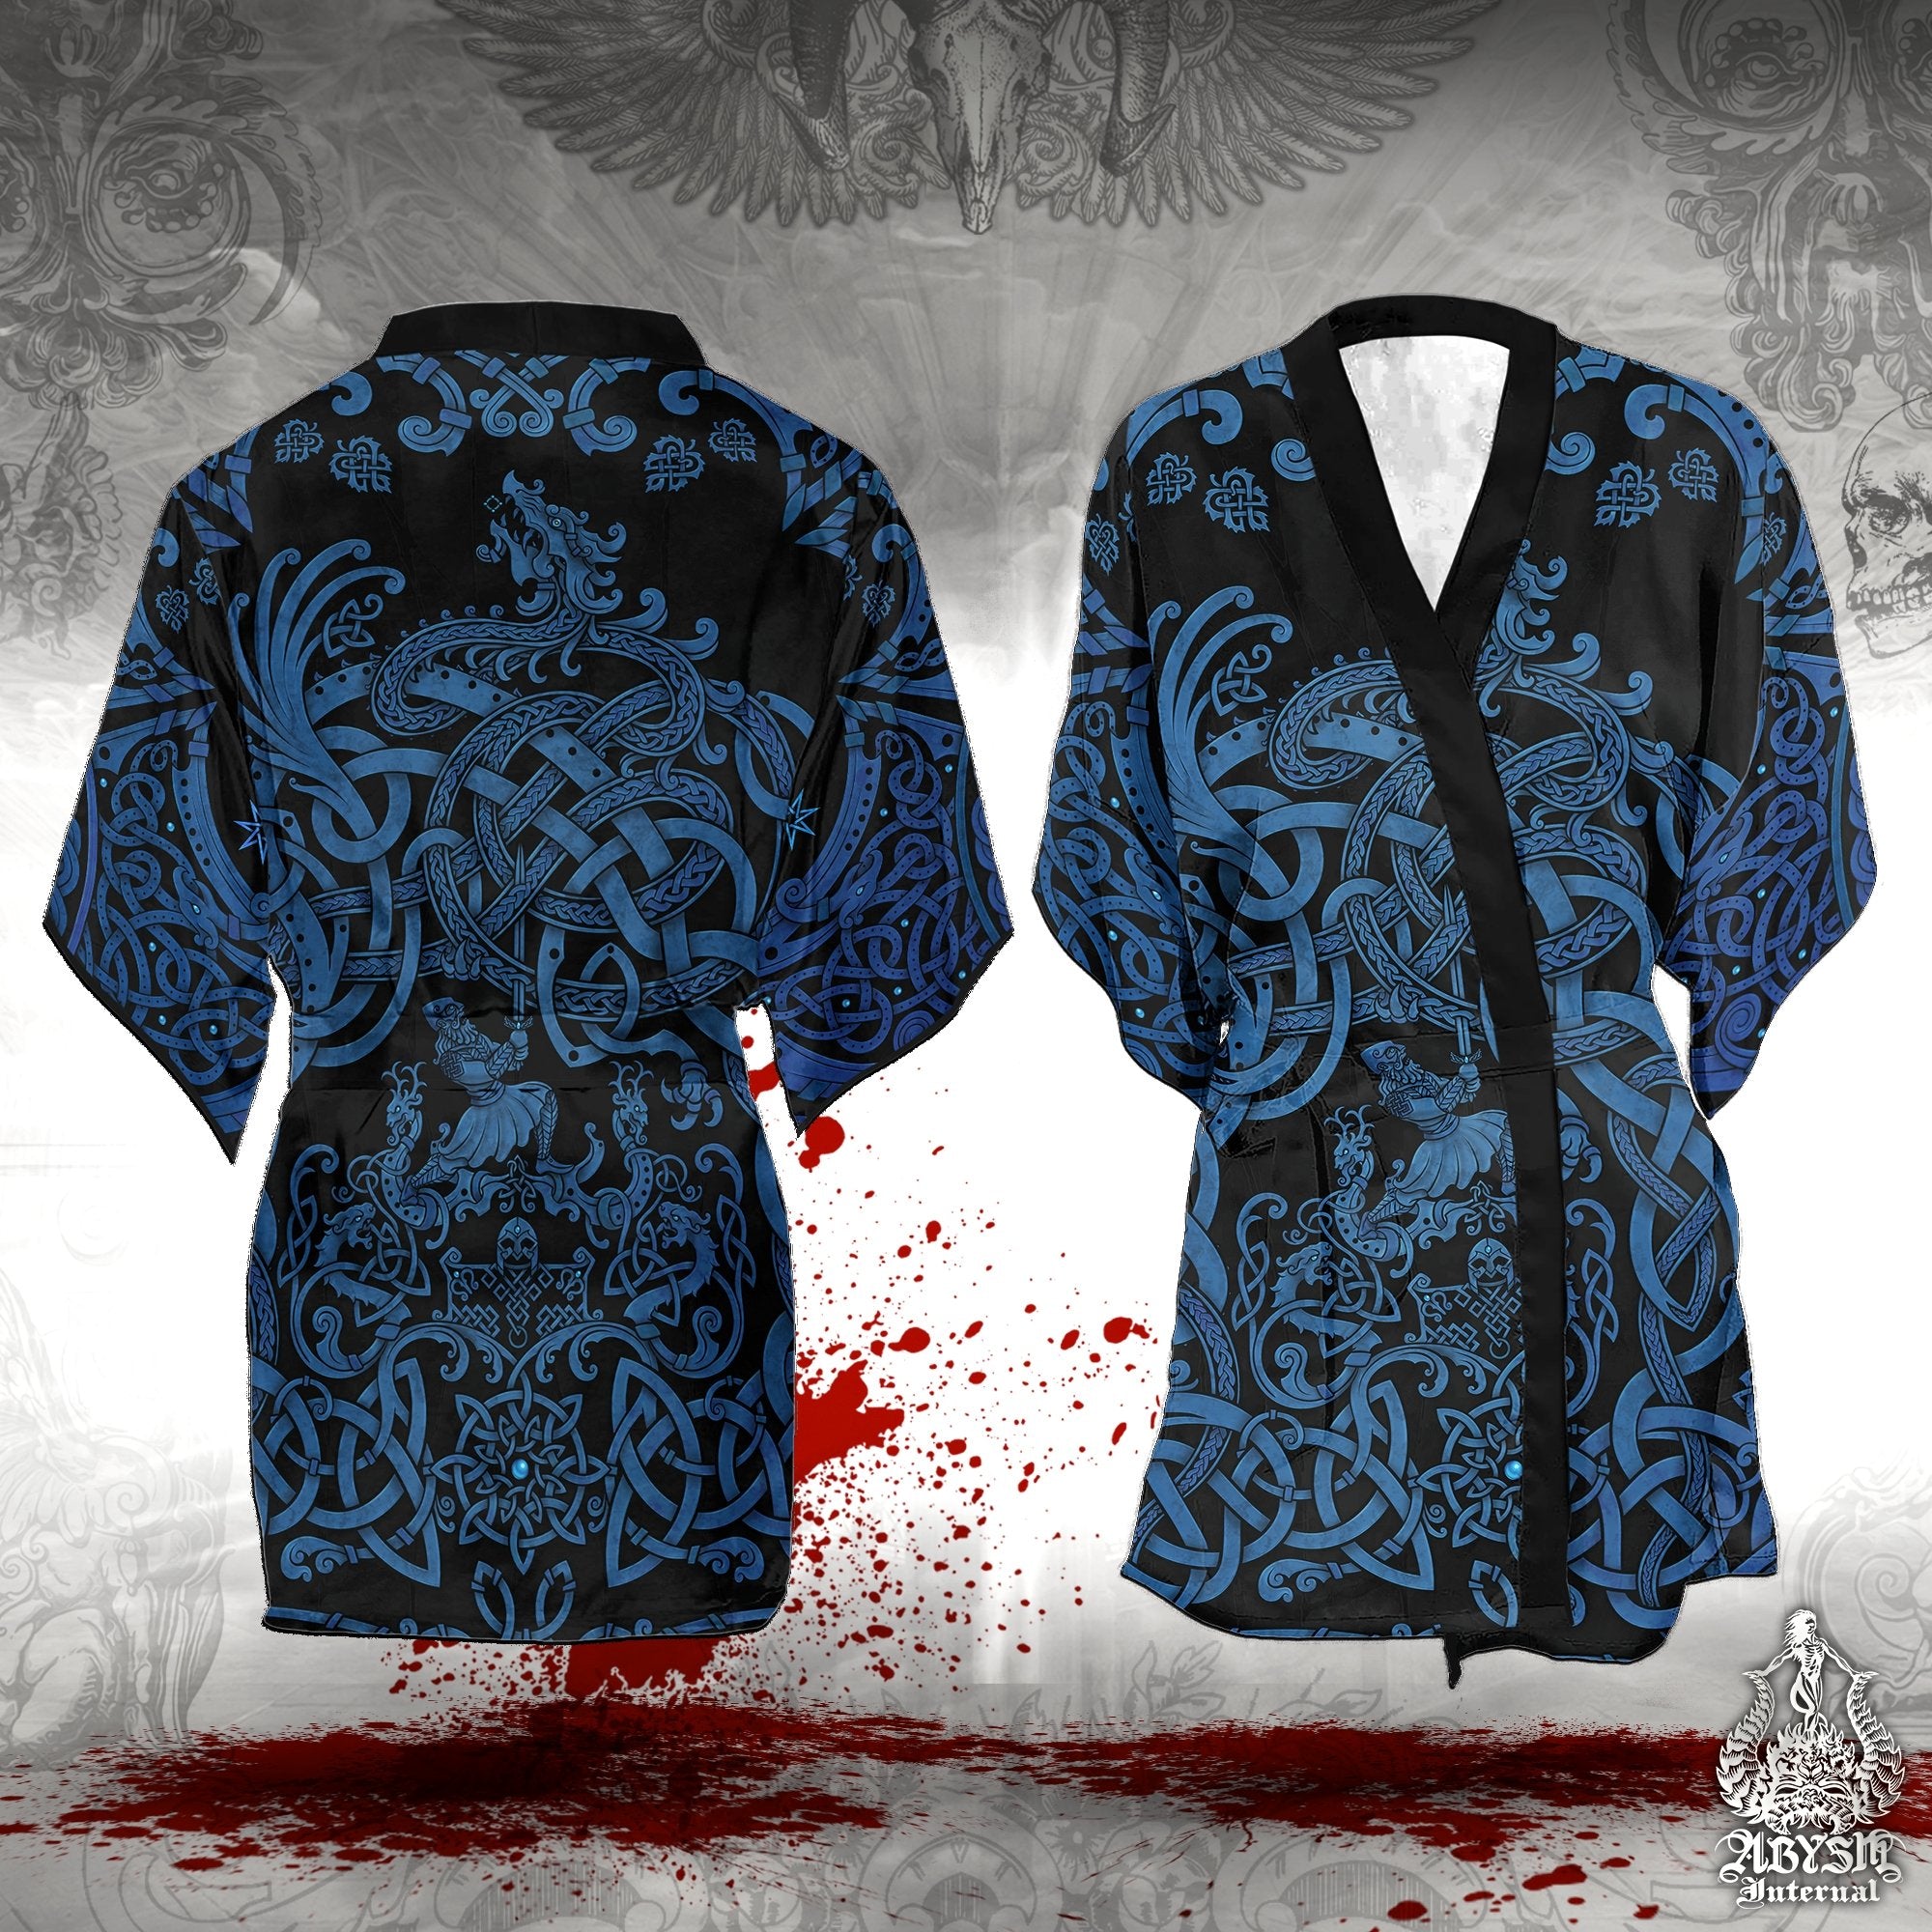 Viking Cover Up, Beach Outfit, Norse Party Kimono, Summer Festival Robe, Indie and Alternative Clothing, Unisex - Dragon Fafnir, Blue Black - Abysm Internal